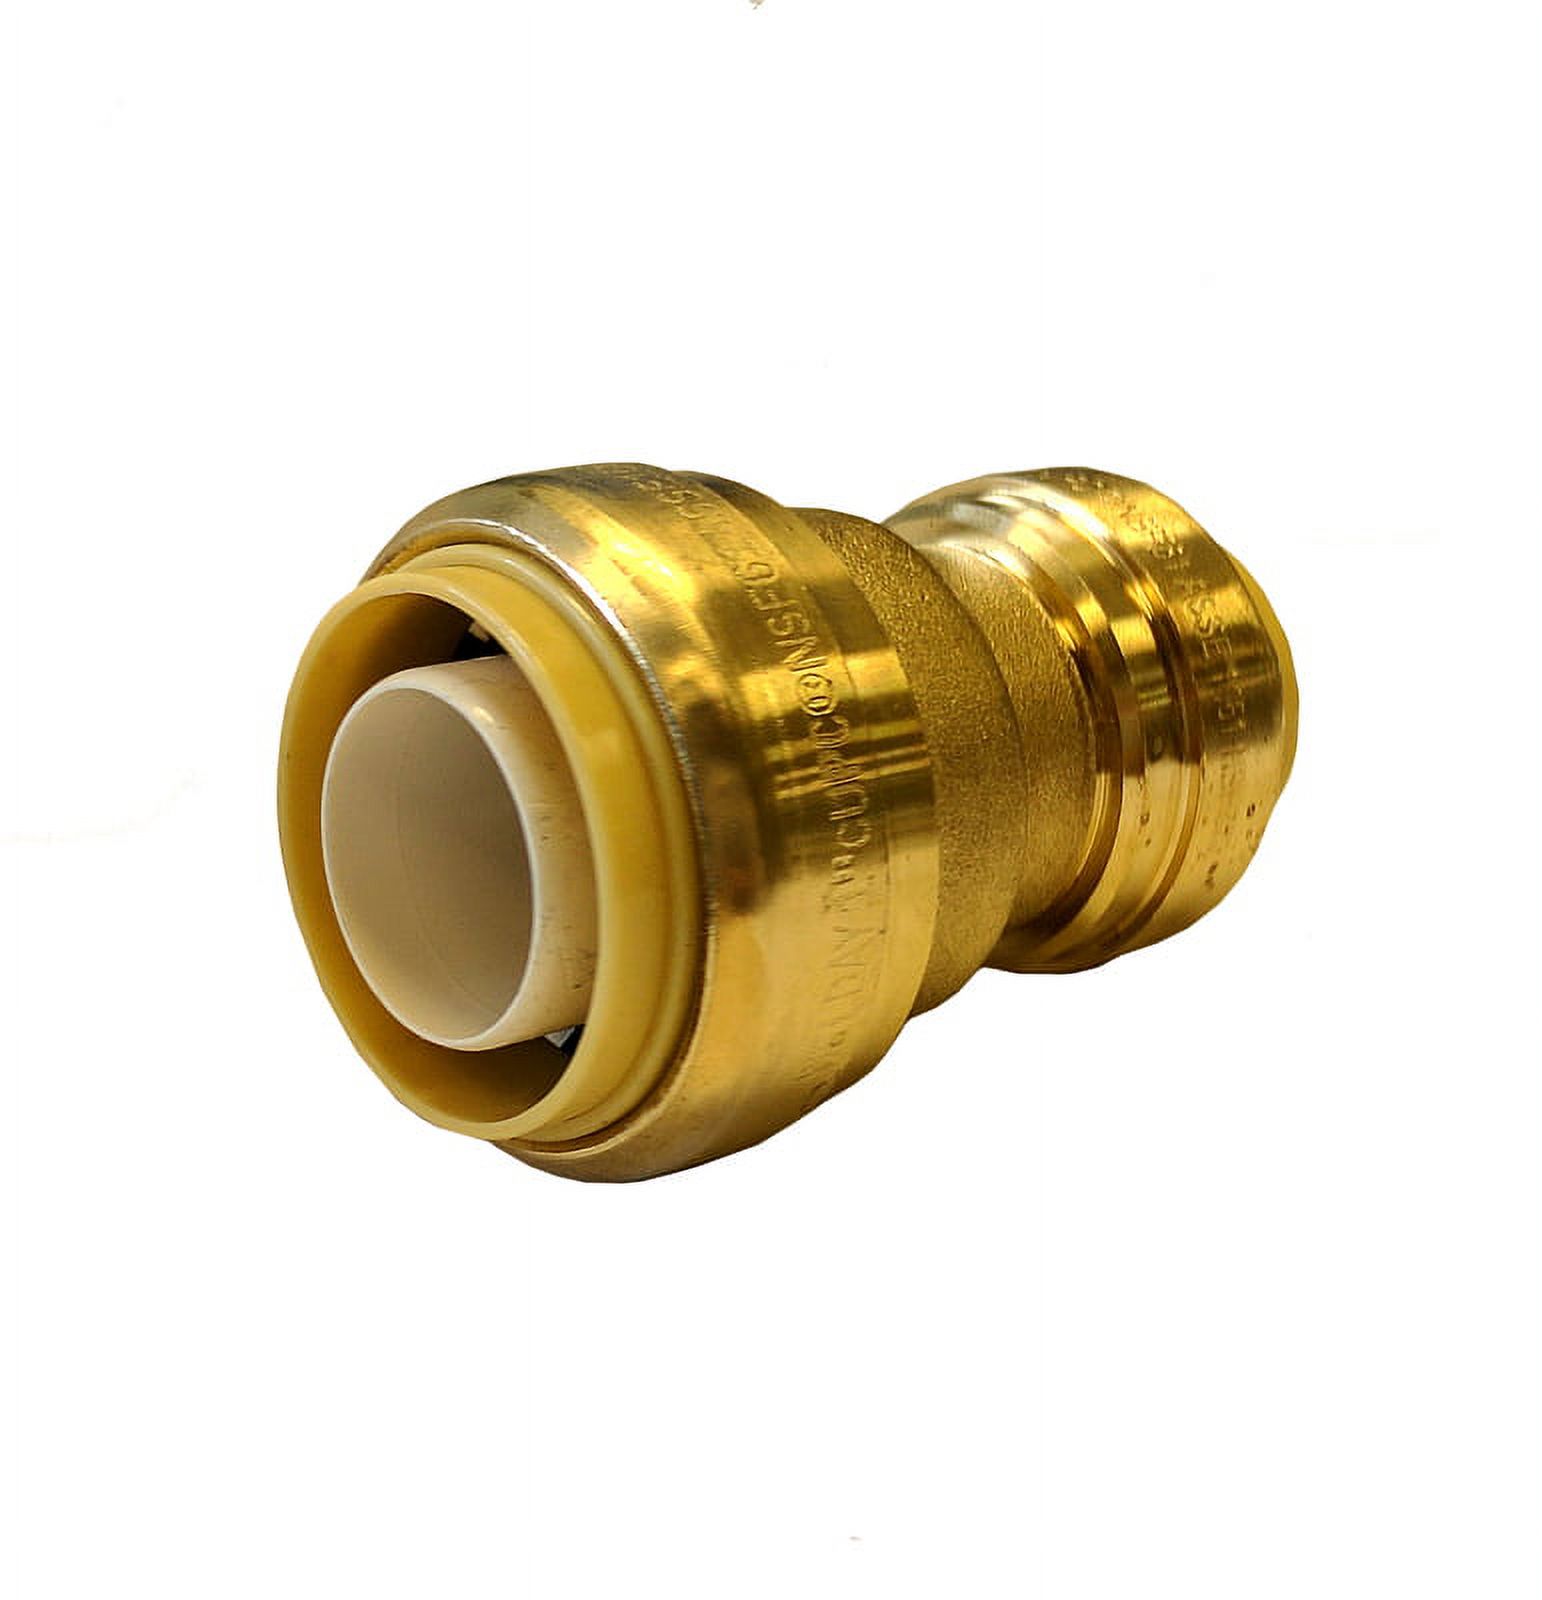 Libra Supply Lead Free 1-1/2 x 1-1/4 inch Push-Fit Coupling, Push to Connect, (Click in for more size options), 1-1/2'' x 1-1/4'', 1-1/2 x 1-1/4-inch, Fits copper tubing, CTS, CPVC and PEX - image 2 of 4